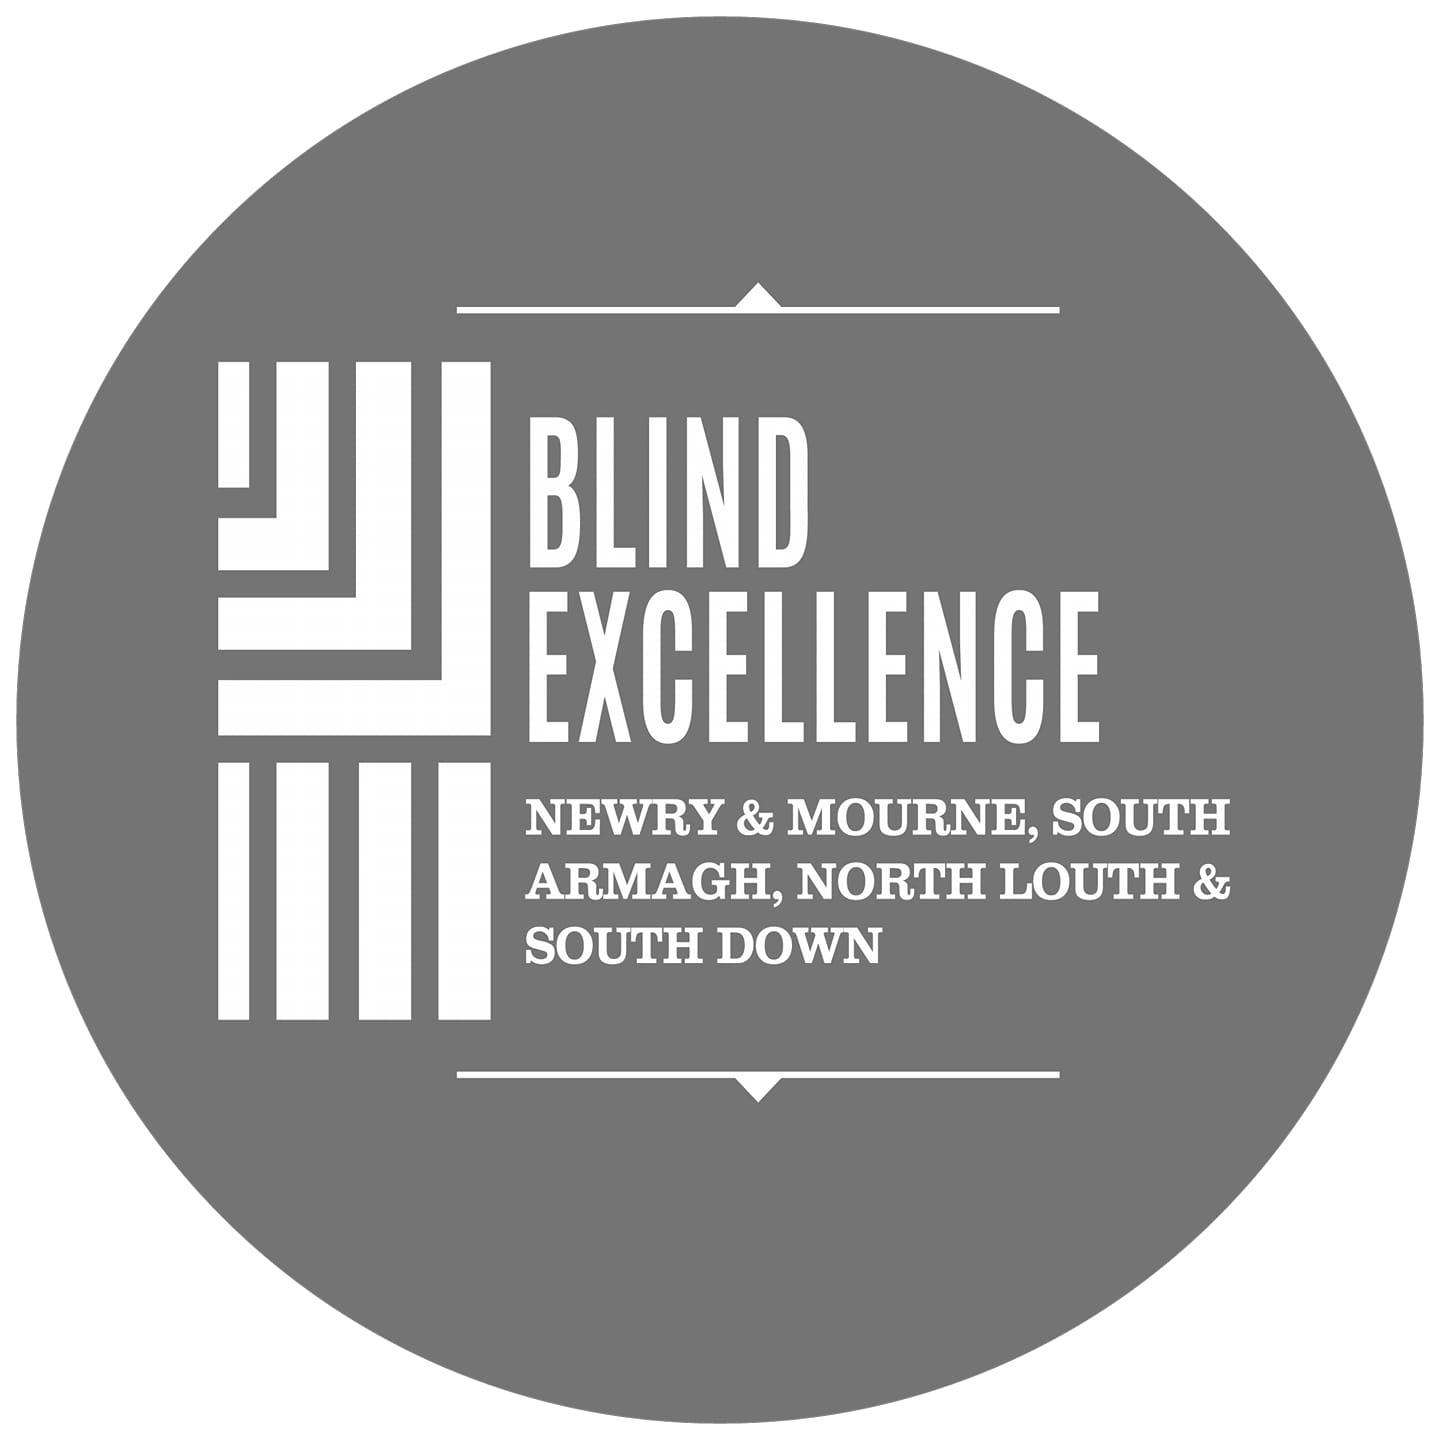 Blind Excellence